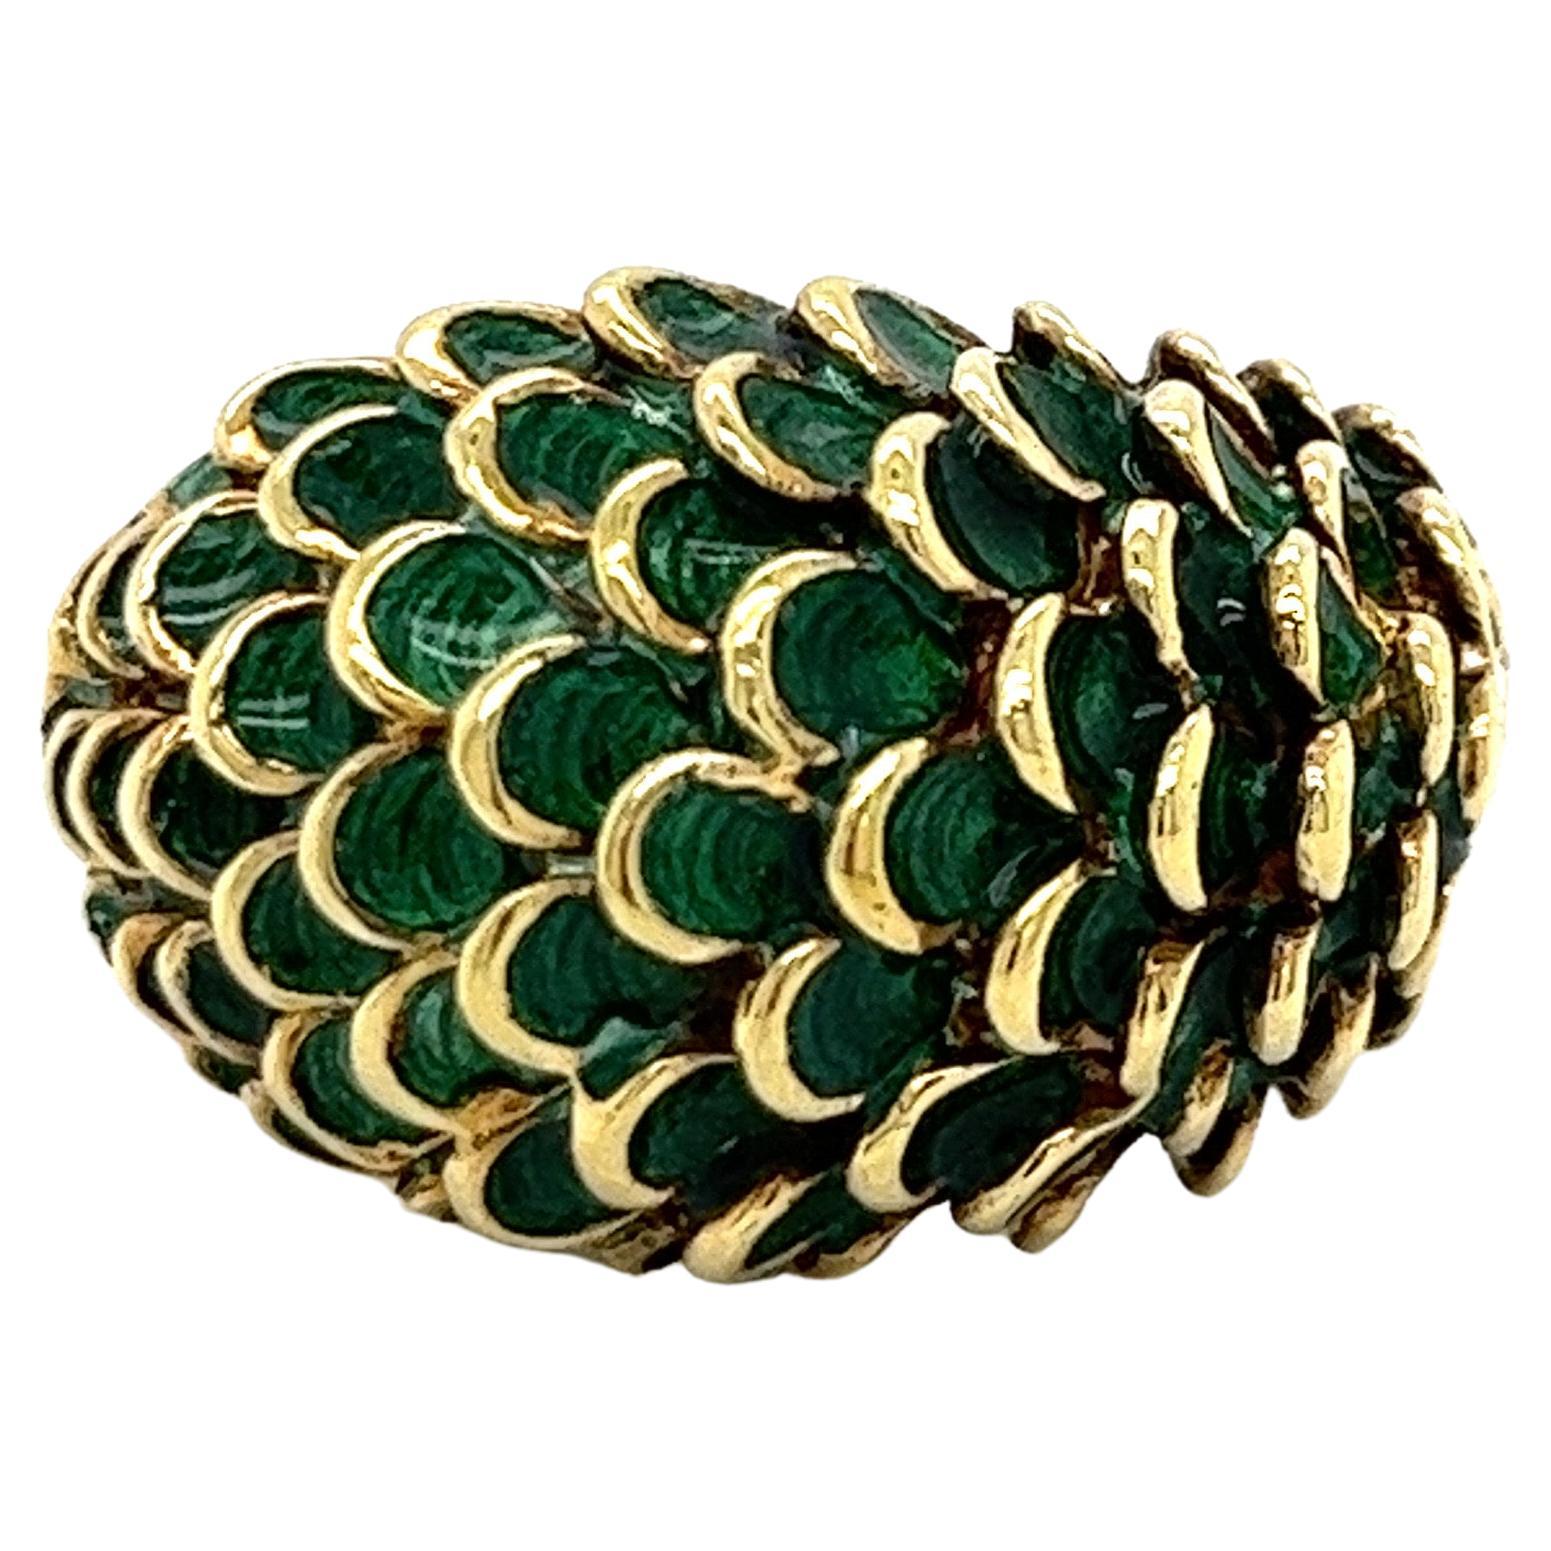 Vintage 1960's 14k Yellow Gold Green Enamel Dome Statement Ring